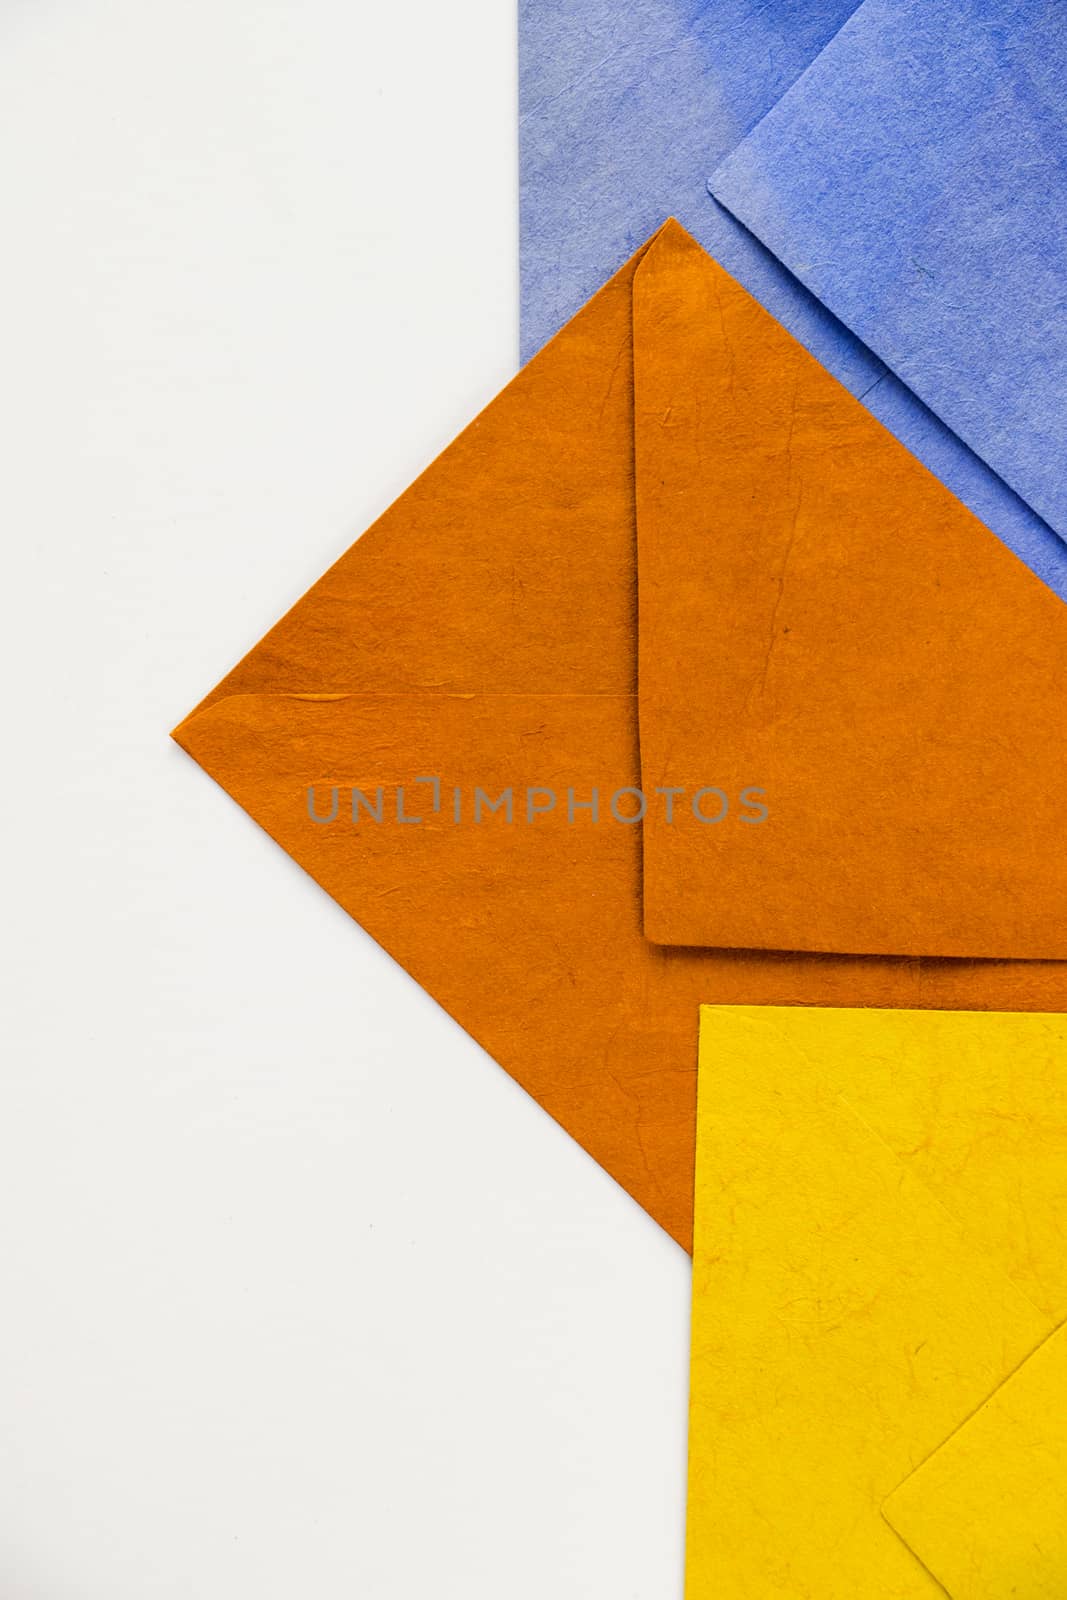 Colorful three envelope on the white background by Taidundua